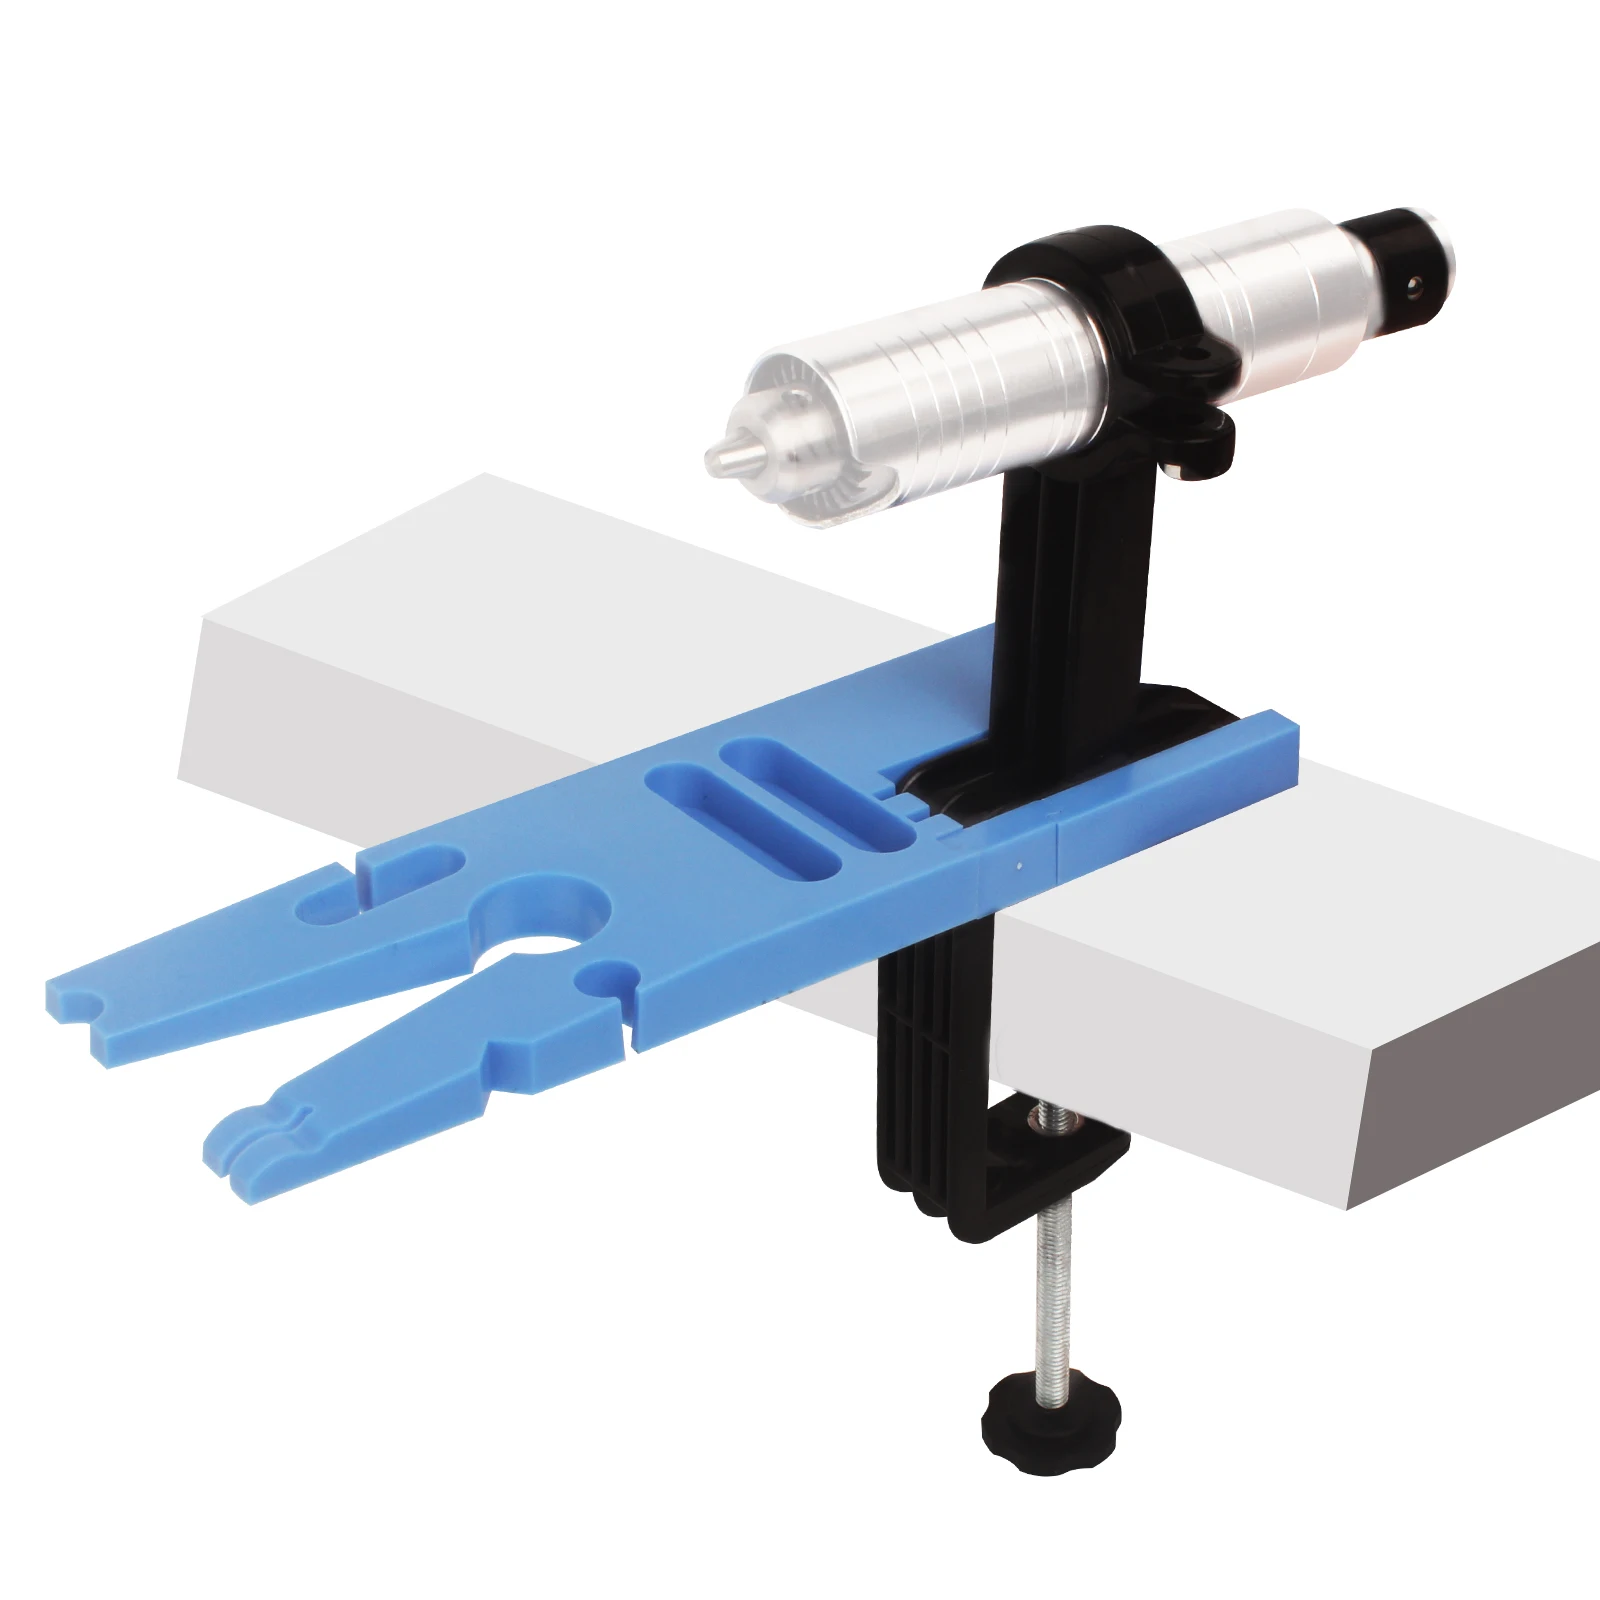 Bench Pin Clamp V-Slot C-Clamp Mount On Table Workbench Jewelers Tool Fixtures for the Table Saw